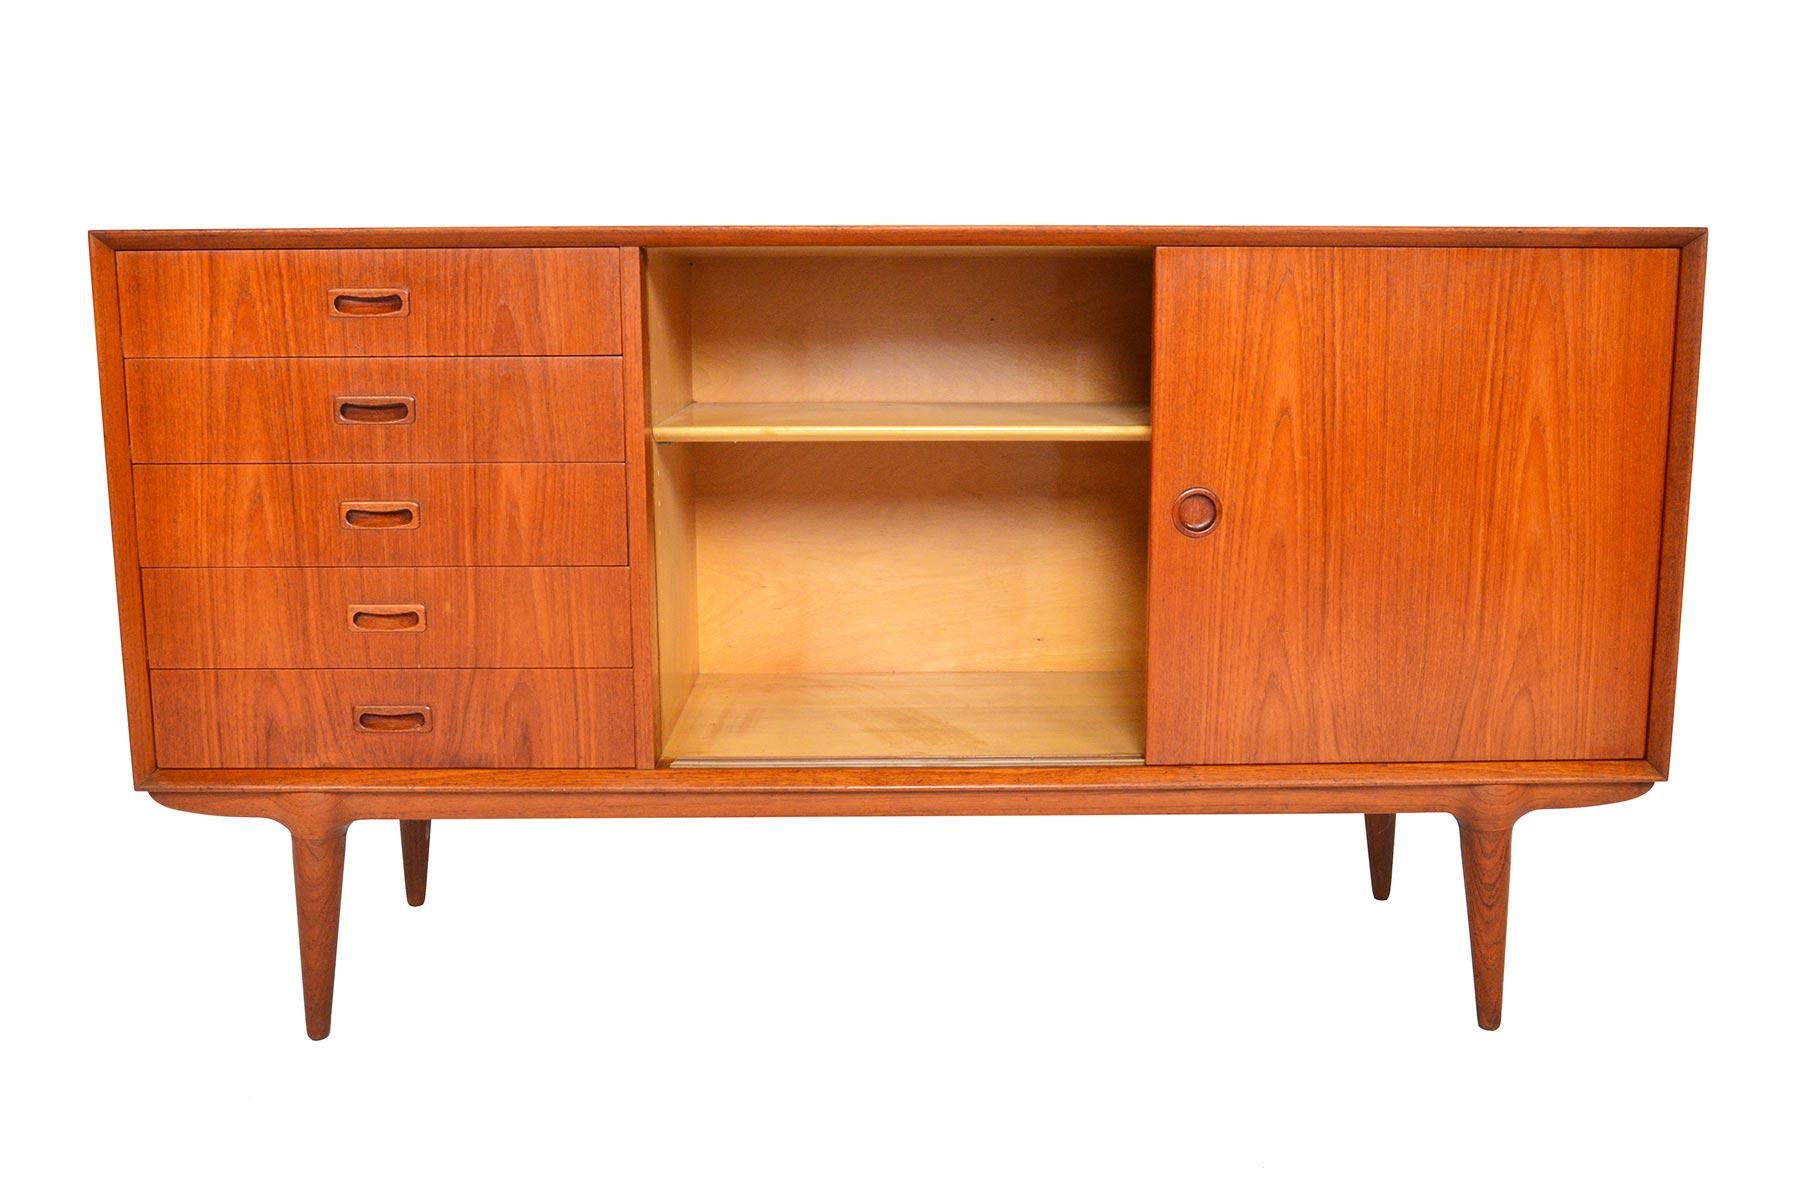 This Danish modern medium sized credenza was designed as Model 3 by Gunni Omann for Omann Jun’s Møbelfabrik in 1956. Beautifully constructed, the case holds a bank of drawers and a large sliding door cabinet with an adjustable shelf. Omann’s